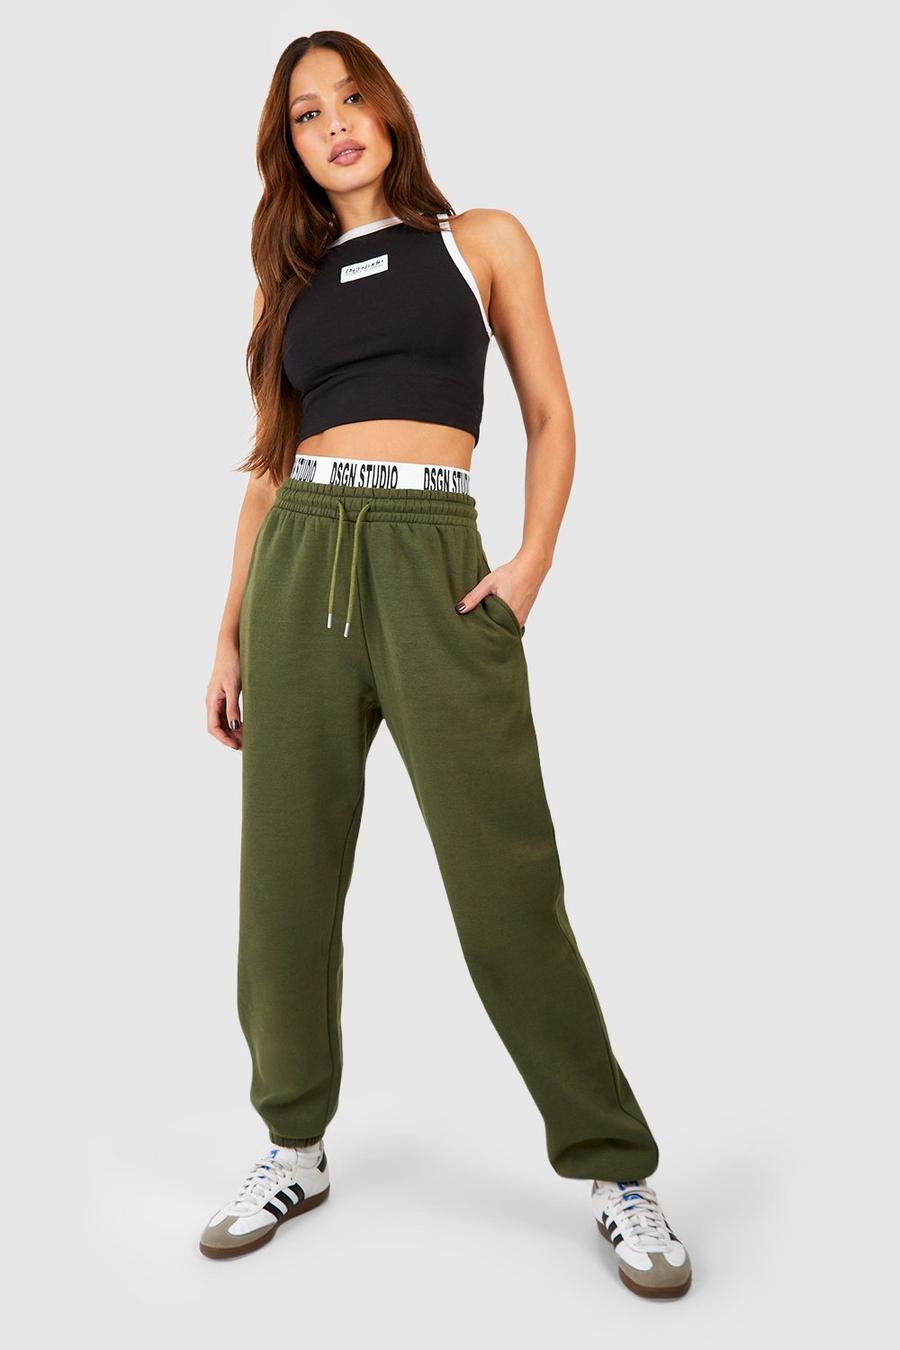 Forest Tall Dsgn Elasticated Detail Cuffed Track Pants